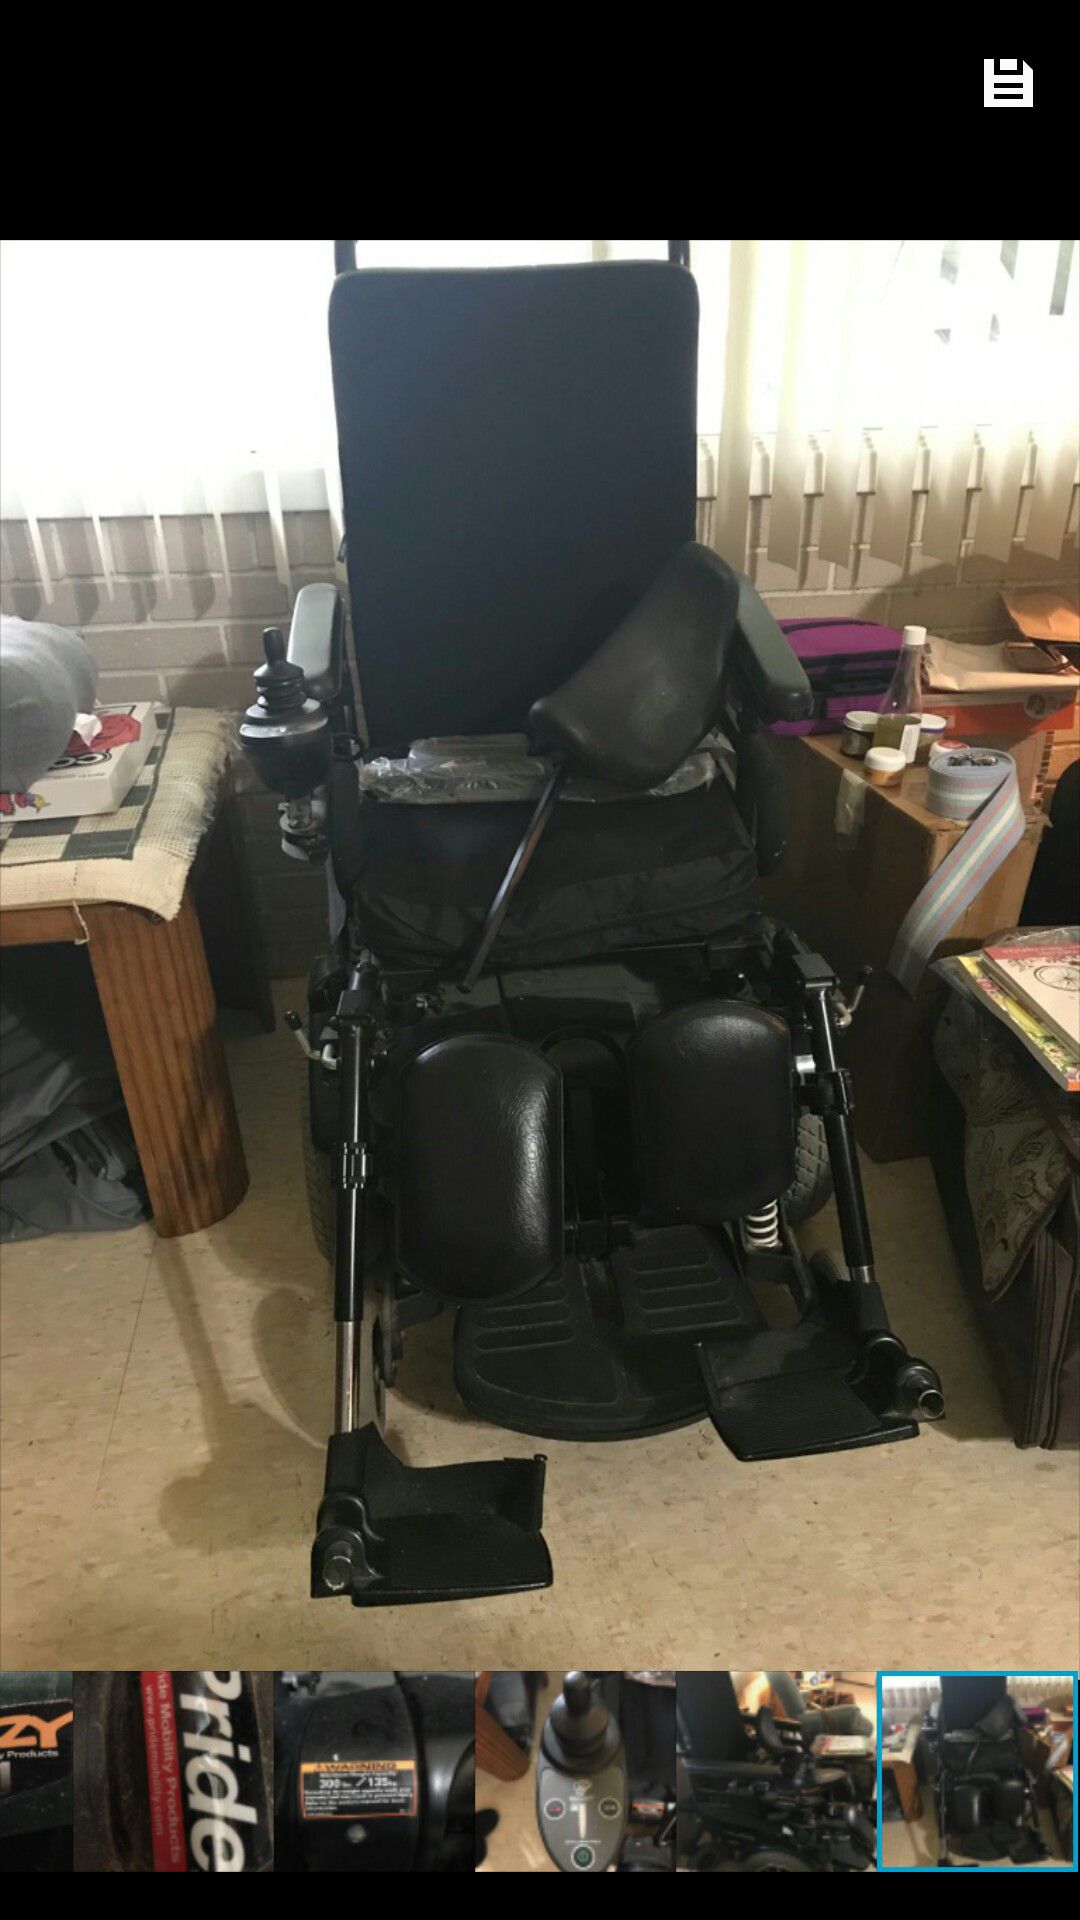 Jazzy Power chair for sale $1500.00 OBO call or text {contact info removed} for more information